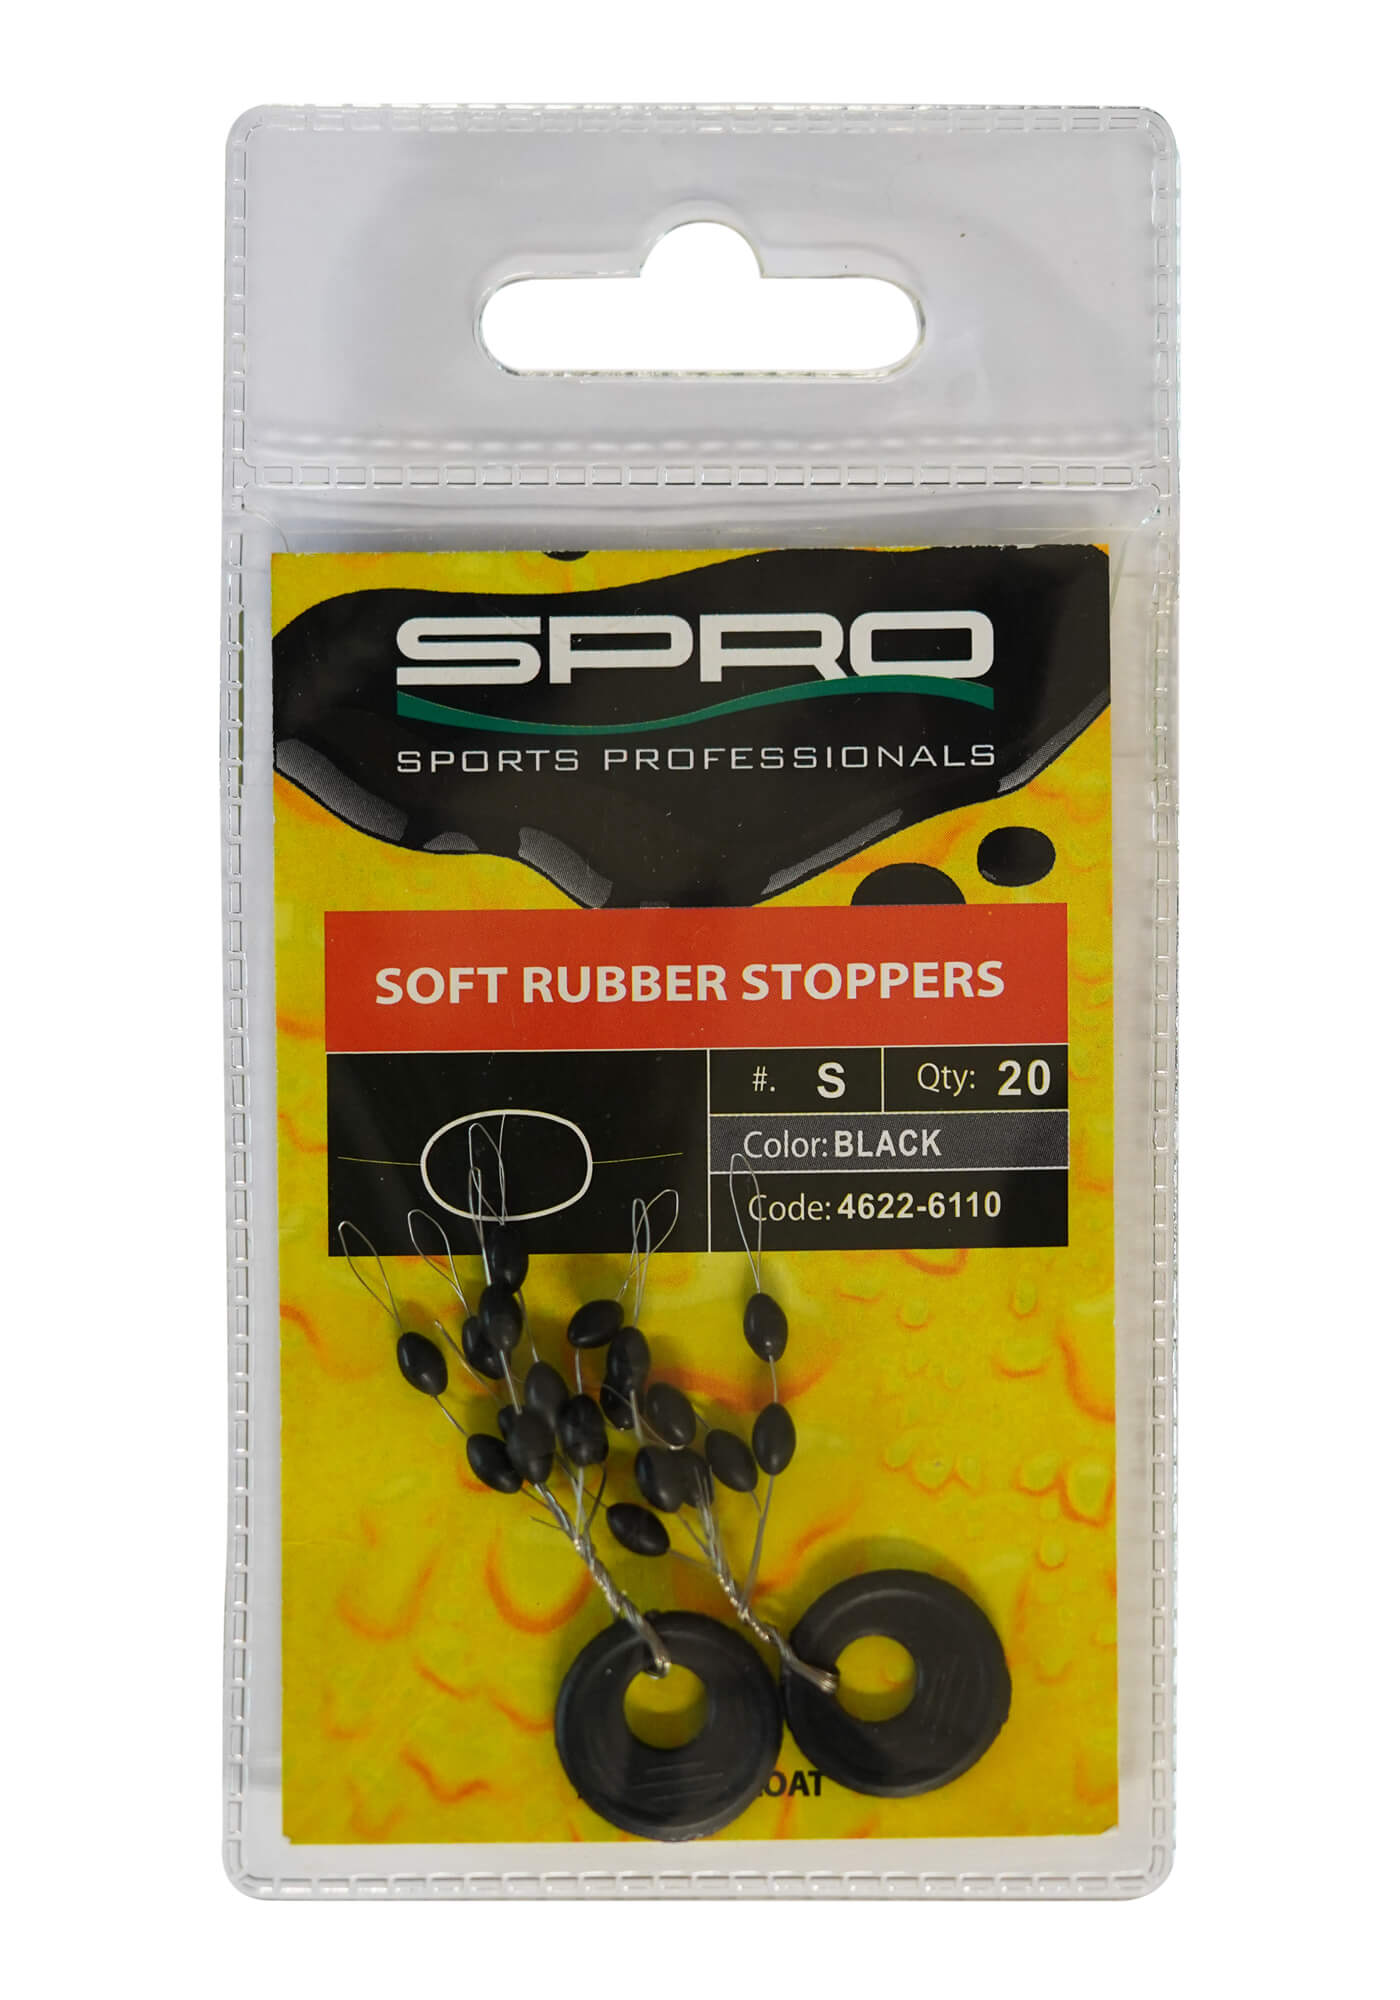 Sizes_Soft_Rubber_Stoppers_S